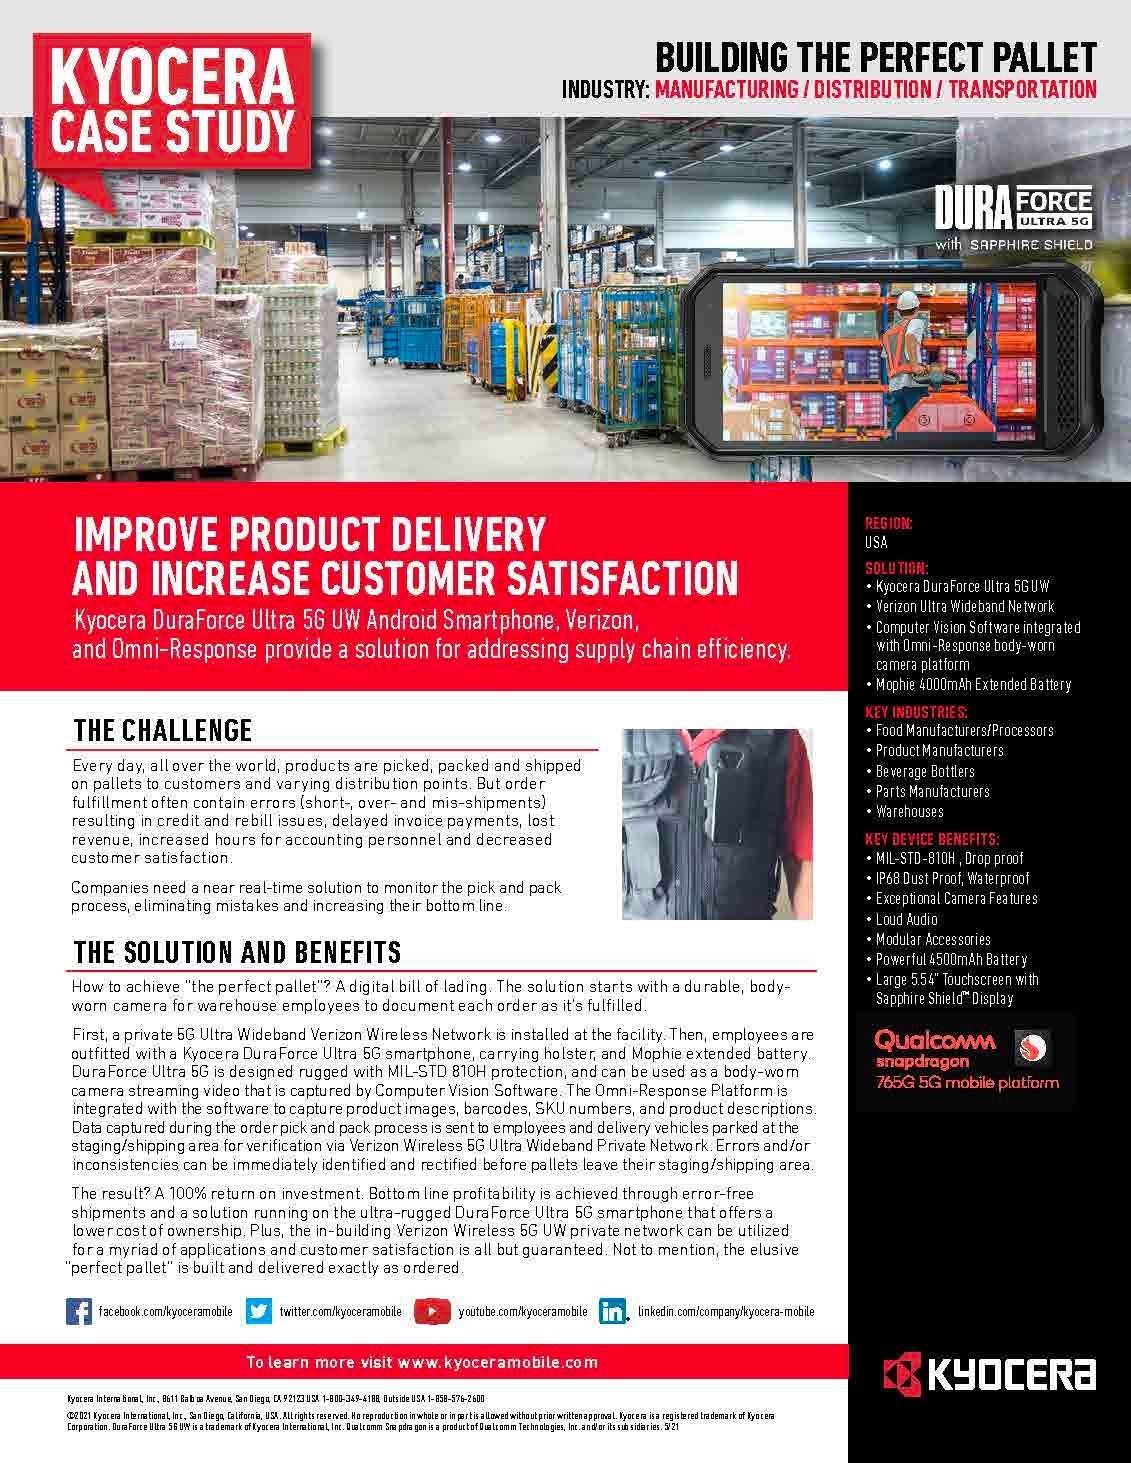 A case study for kyocera shows how to improve product delivery and increase customer satisfaction.